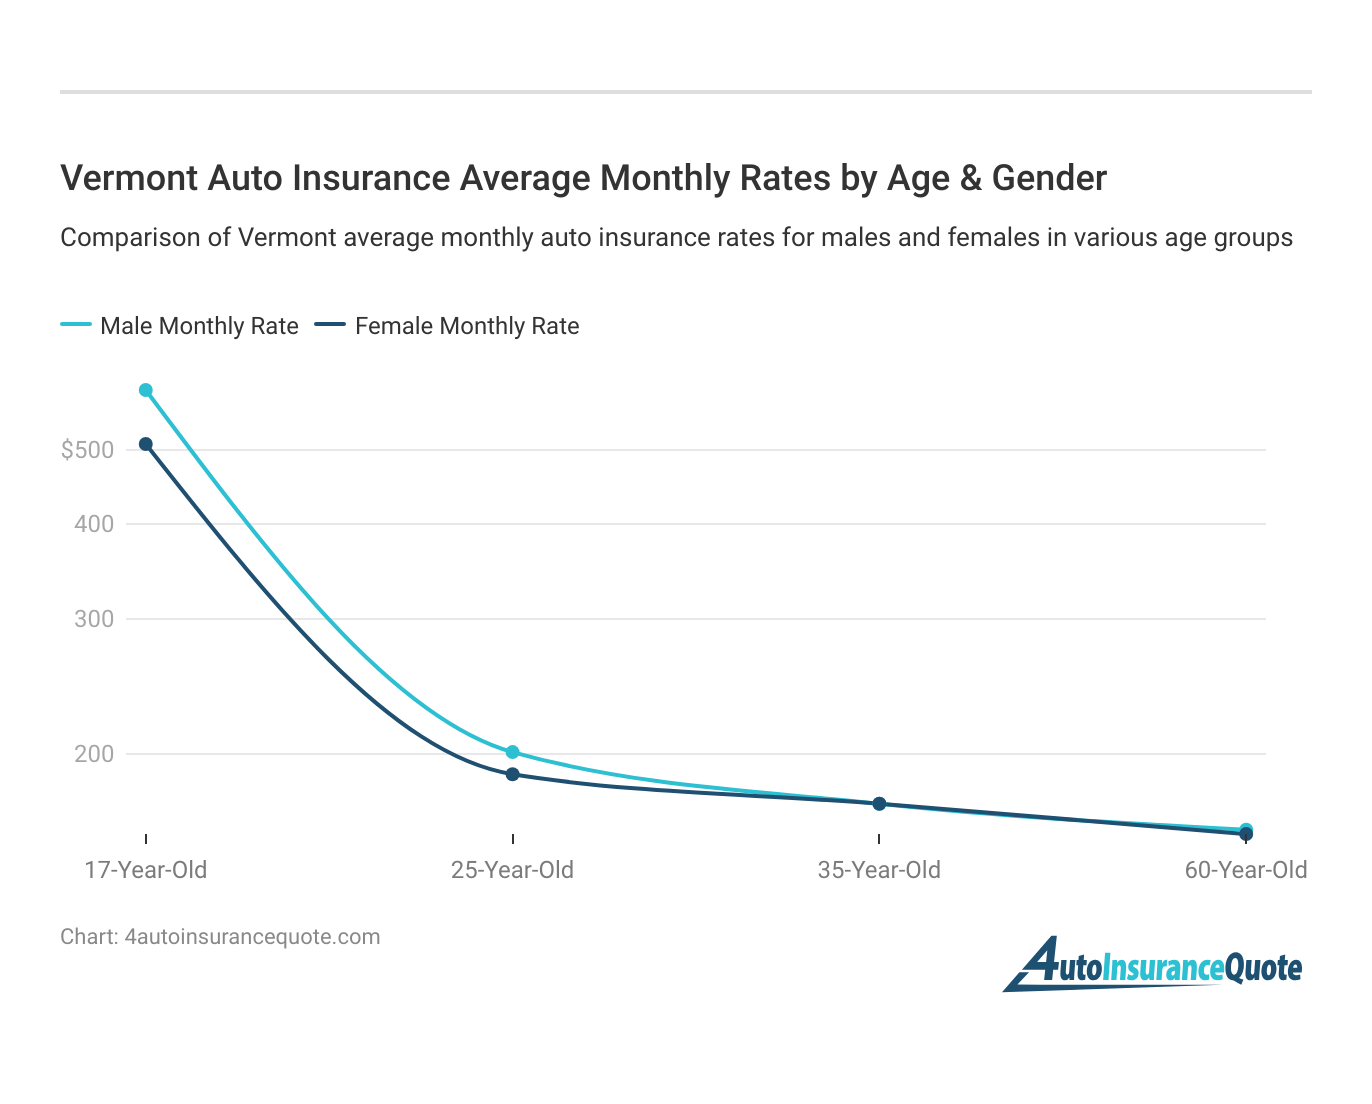 <h3>Vermont Auto Insurance Average Monthly Rates by Age & Gender</h3>